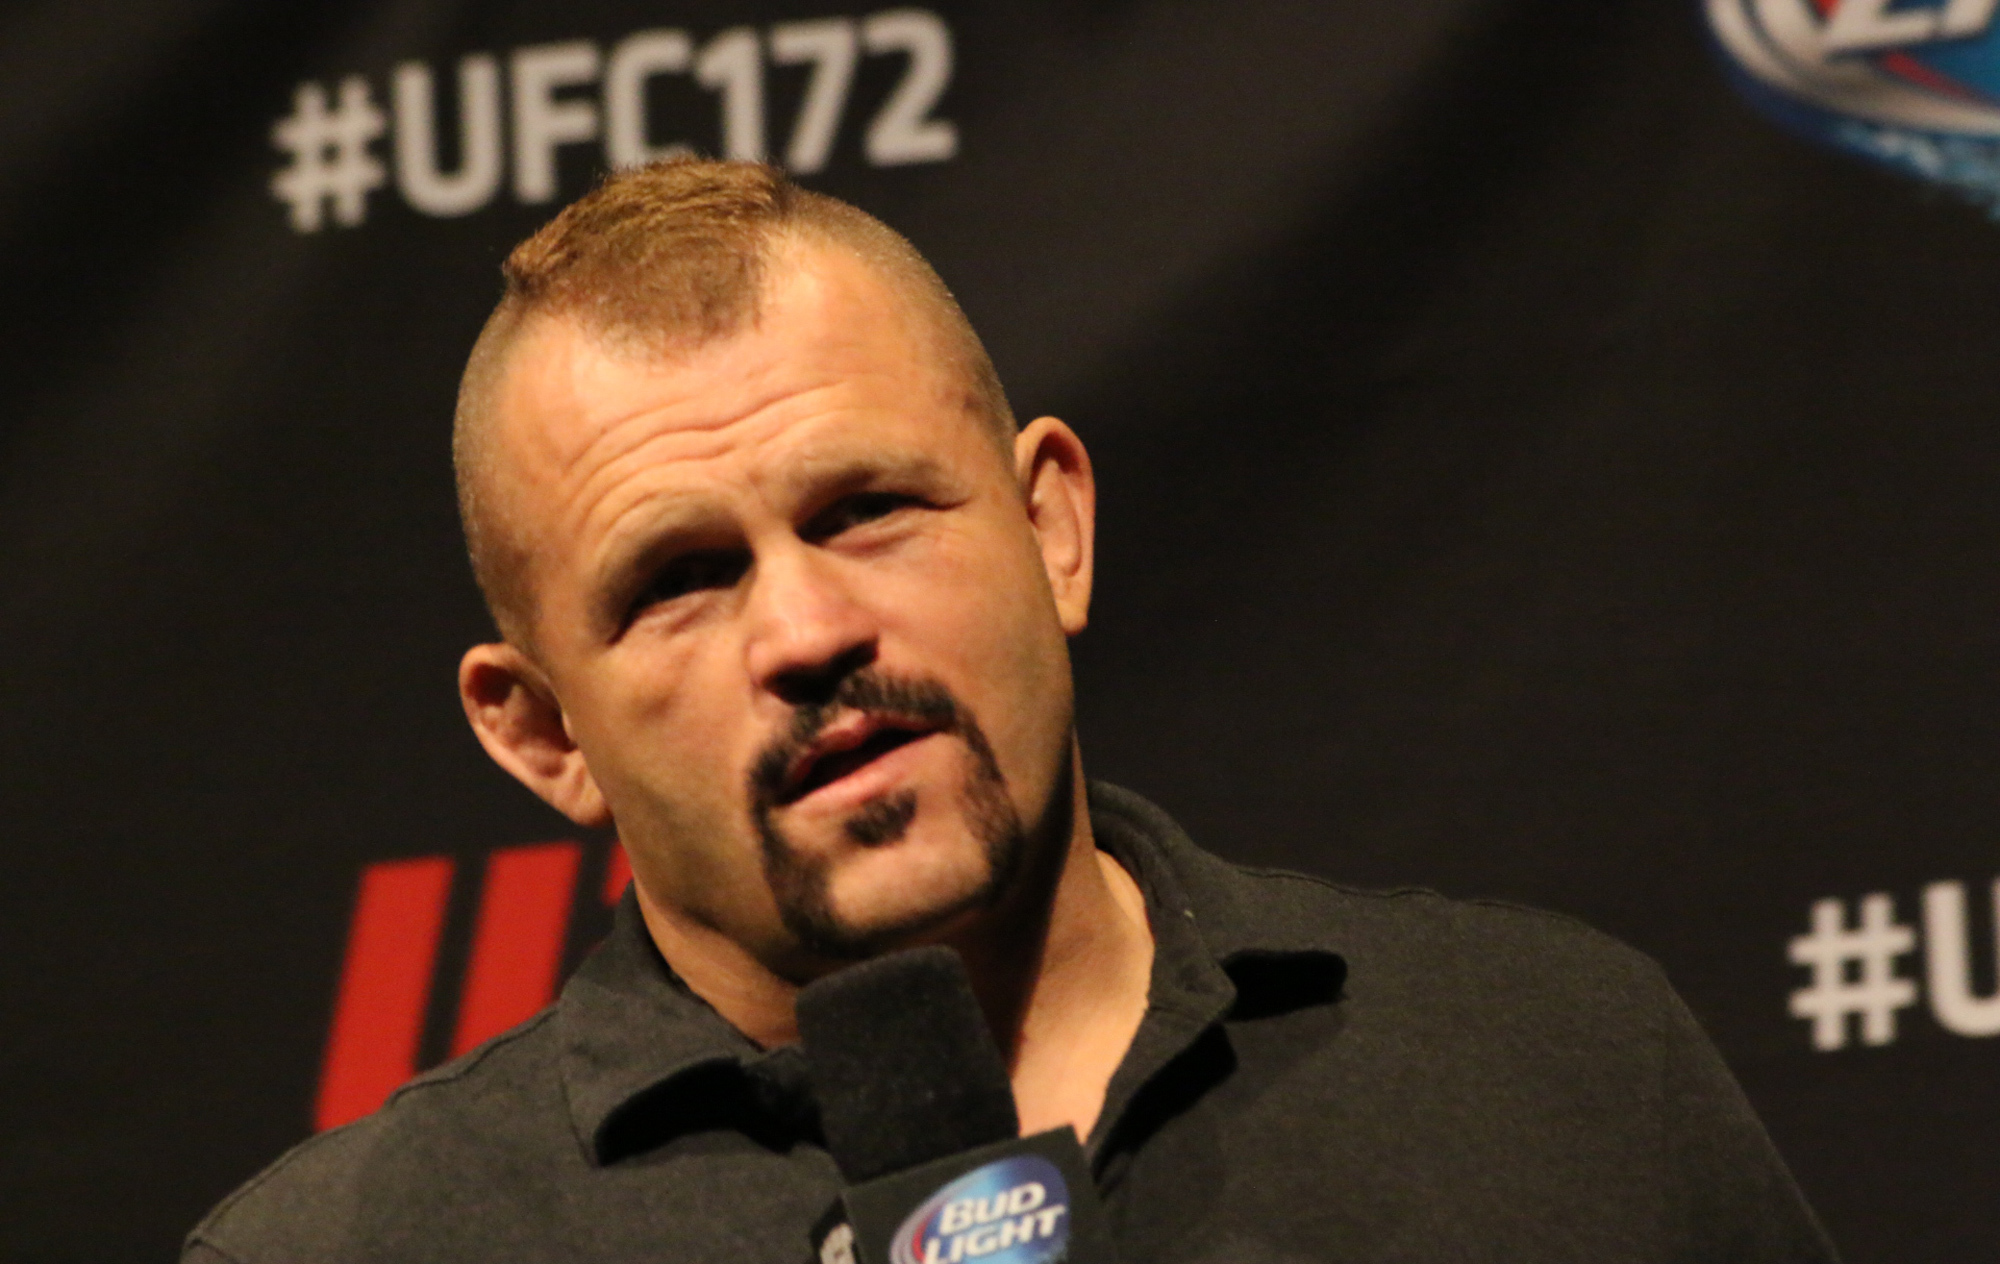 Chuck Liddell Wallpaper Image Photos Pictures Background